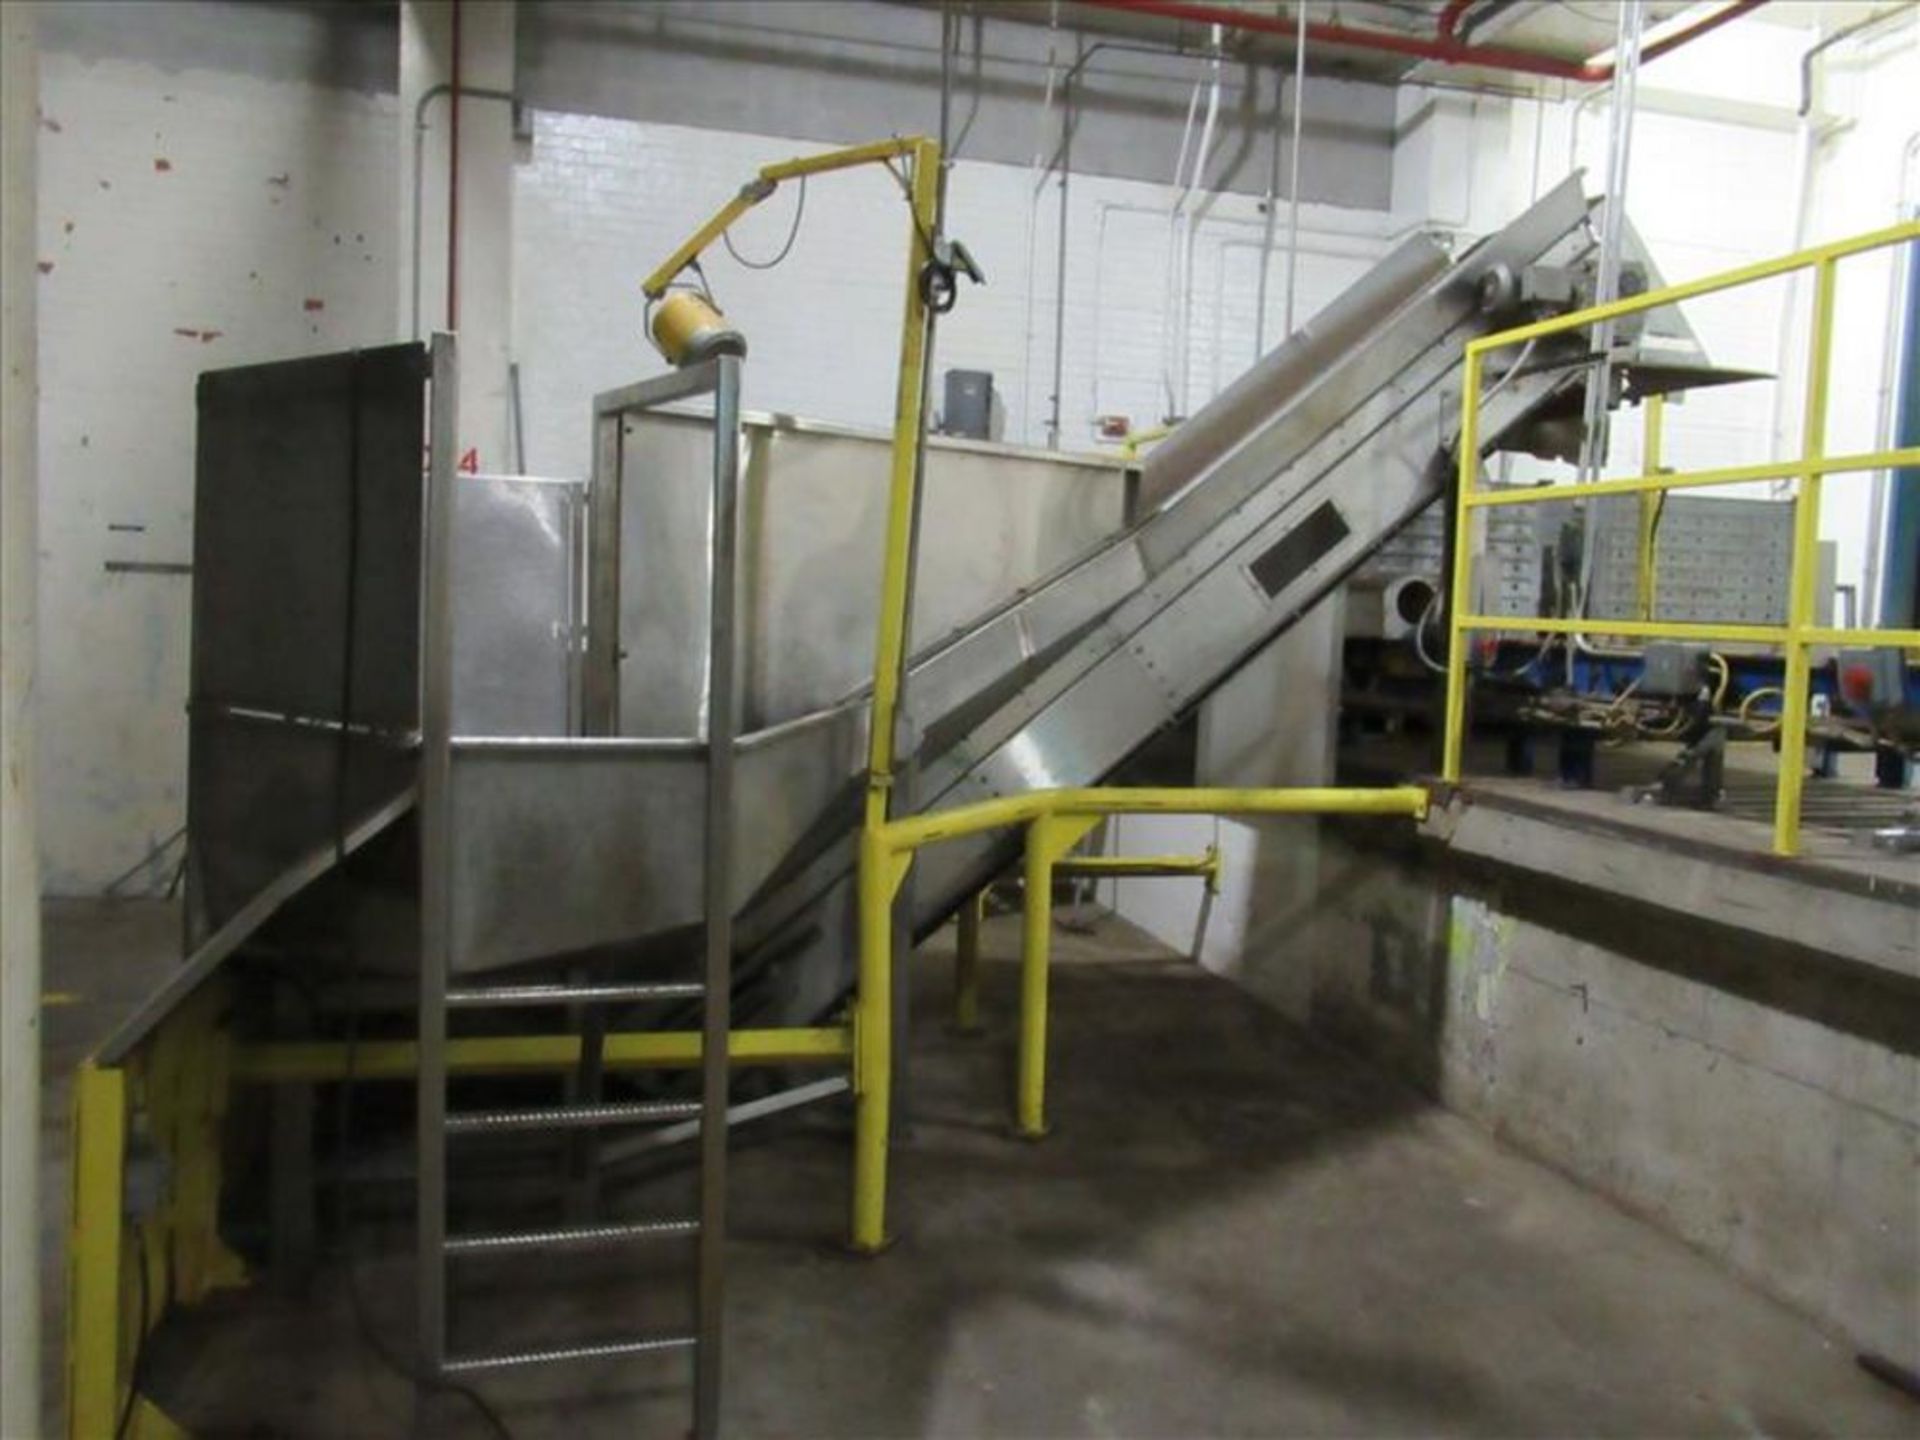 Vegetable stainless receiving hopper conveyor bunker type, approx 10 ft w x 24 in h x 4 ft deep